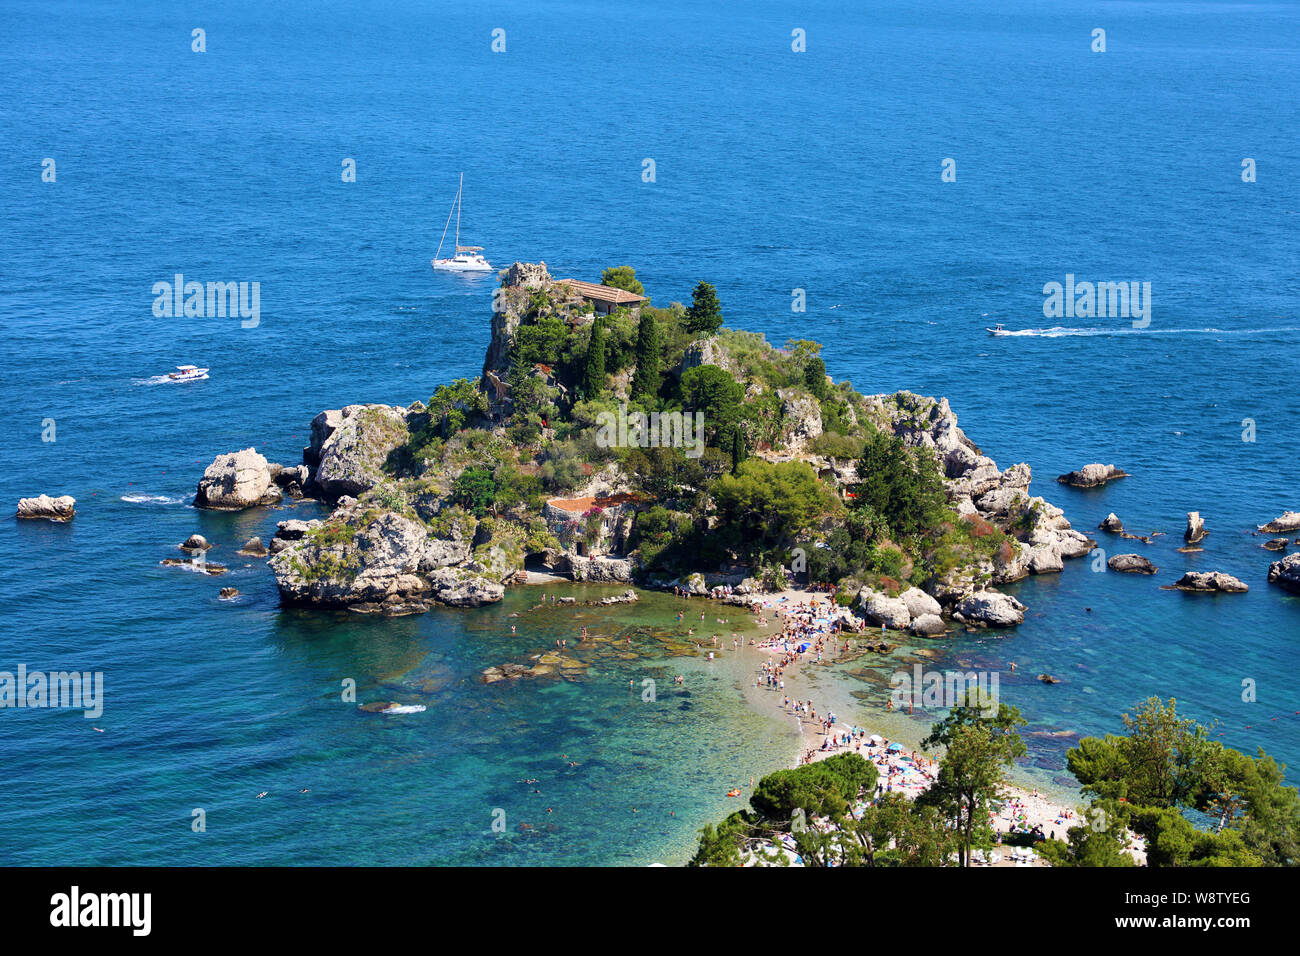 Aerial view of Isola Bella island in Taormina, Italy Stock Photo